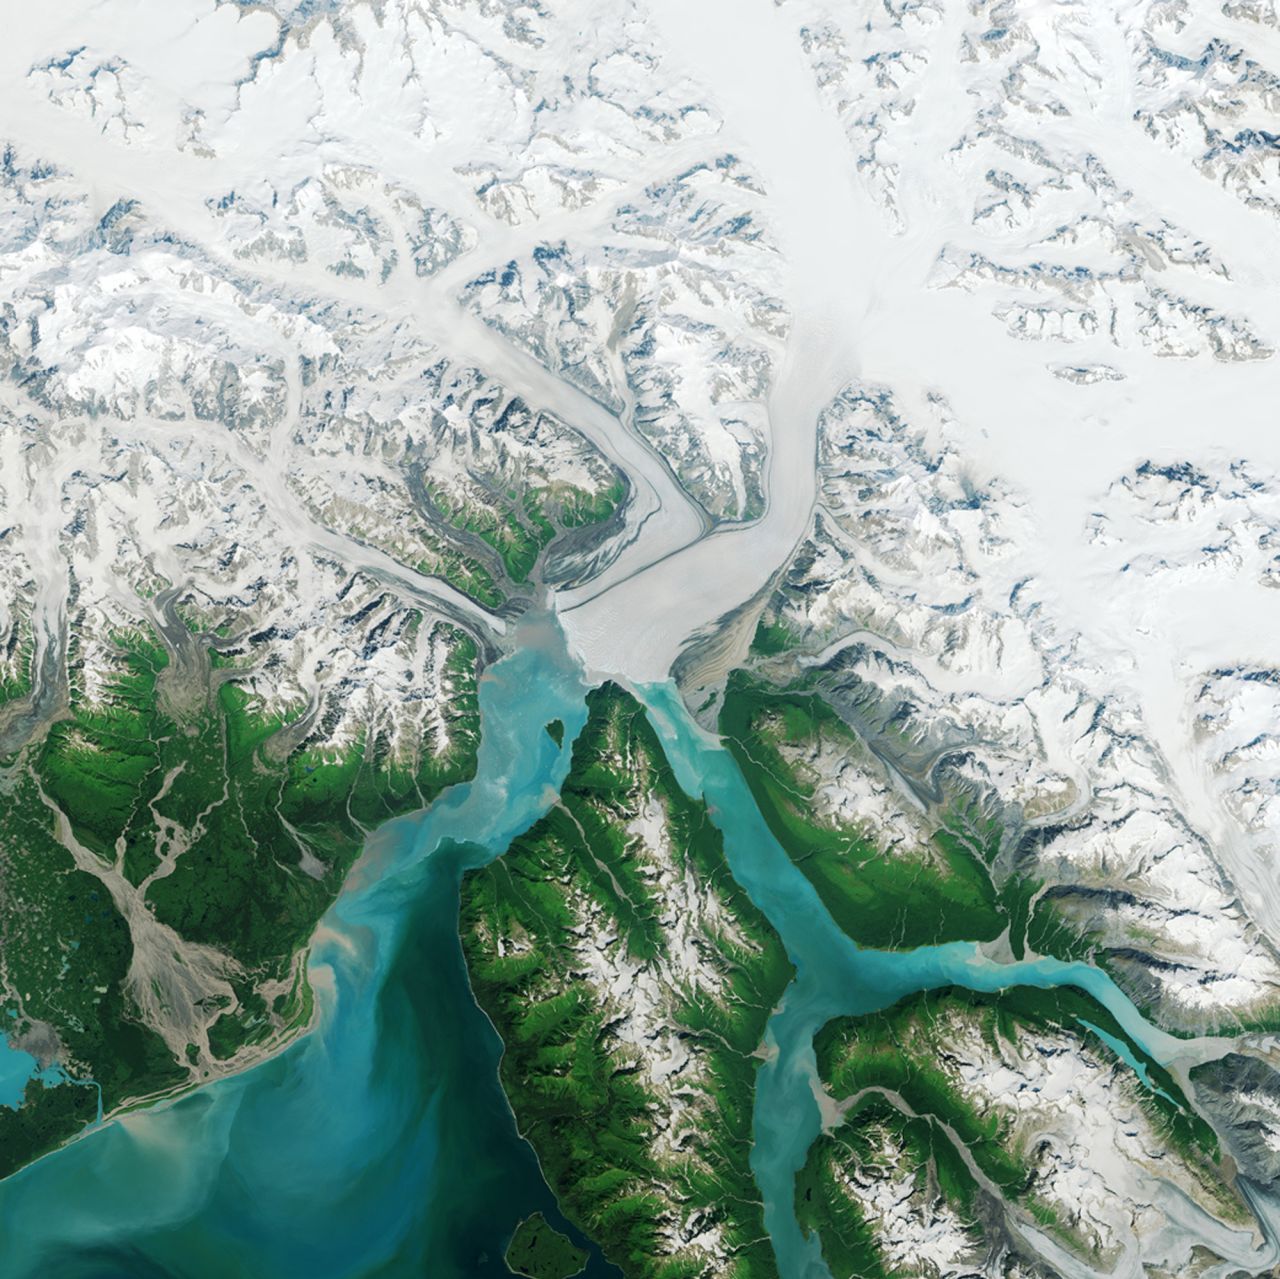 Hubbard Glacier, in Alaska, is seven miles wide, and is <a href="https://www.nps.gov/wrst/learn/nature/glaciers.htm#:~:text=Hubbard%20Glacier,-The%20Hubbard%20Glacier&text=It%20is%2076%20miles%20long,Elias%20National%20Park%20%26%20Preserve." target="_blank" target="_blank">North America's largest tidewater glacier</a> (one that terminates in the sea). It is currently considered in a stable position and in 2015 <a href="https://earthobservatory.nasa.gov/images/85900/the-advance-of-hubbard-glacier#:~:text=With%20nowhere%20to%20drain%2C%20runoff,(0.8%20feet)%20per%20day." target="_blank" target="_blank">NASA reported</a> that it had steadily grown over the previous 100 years.